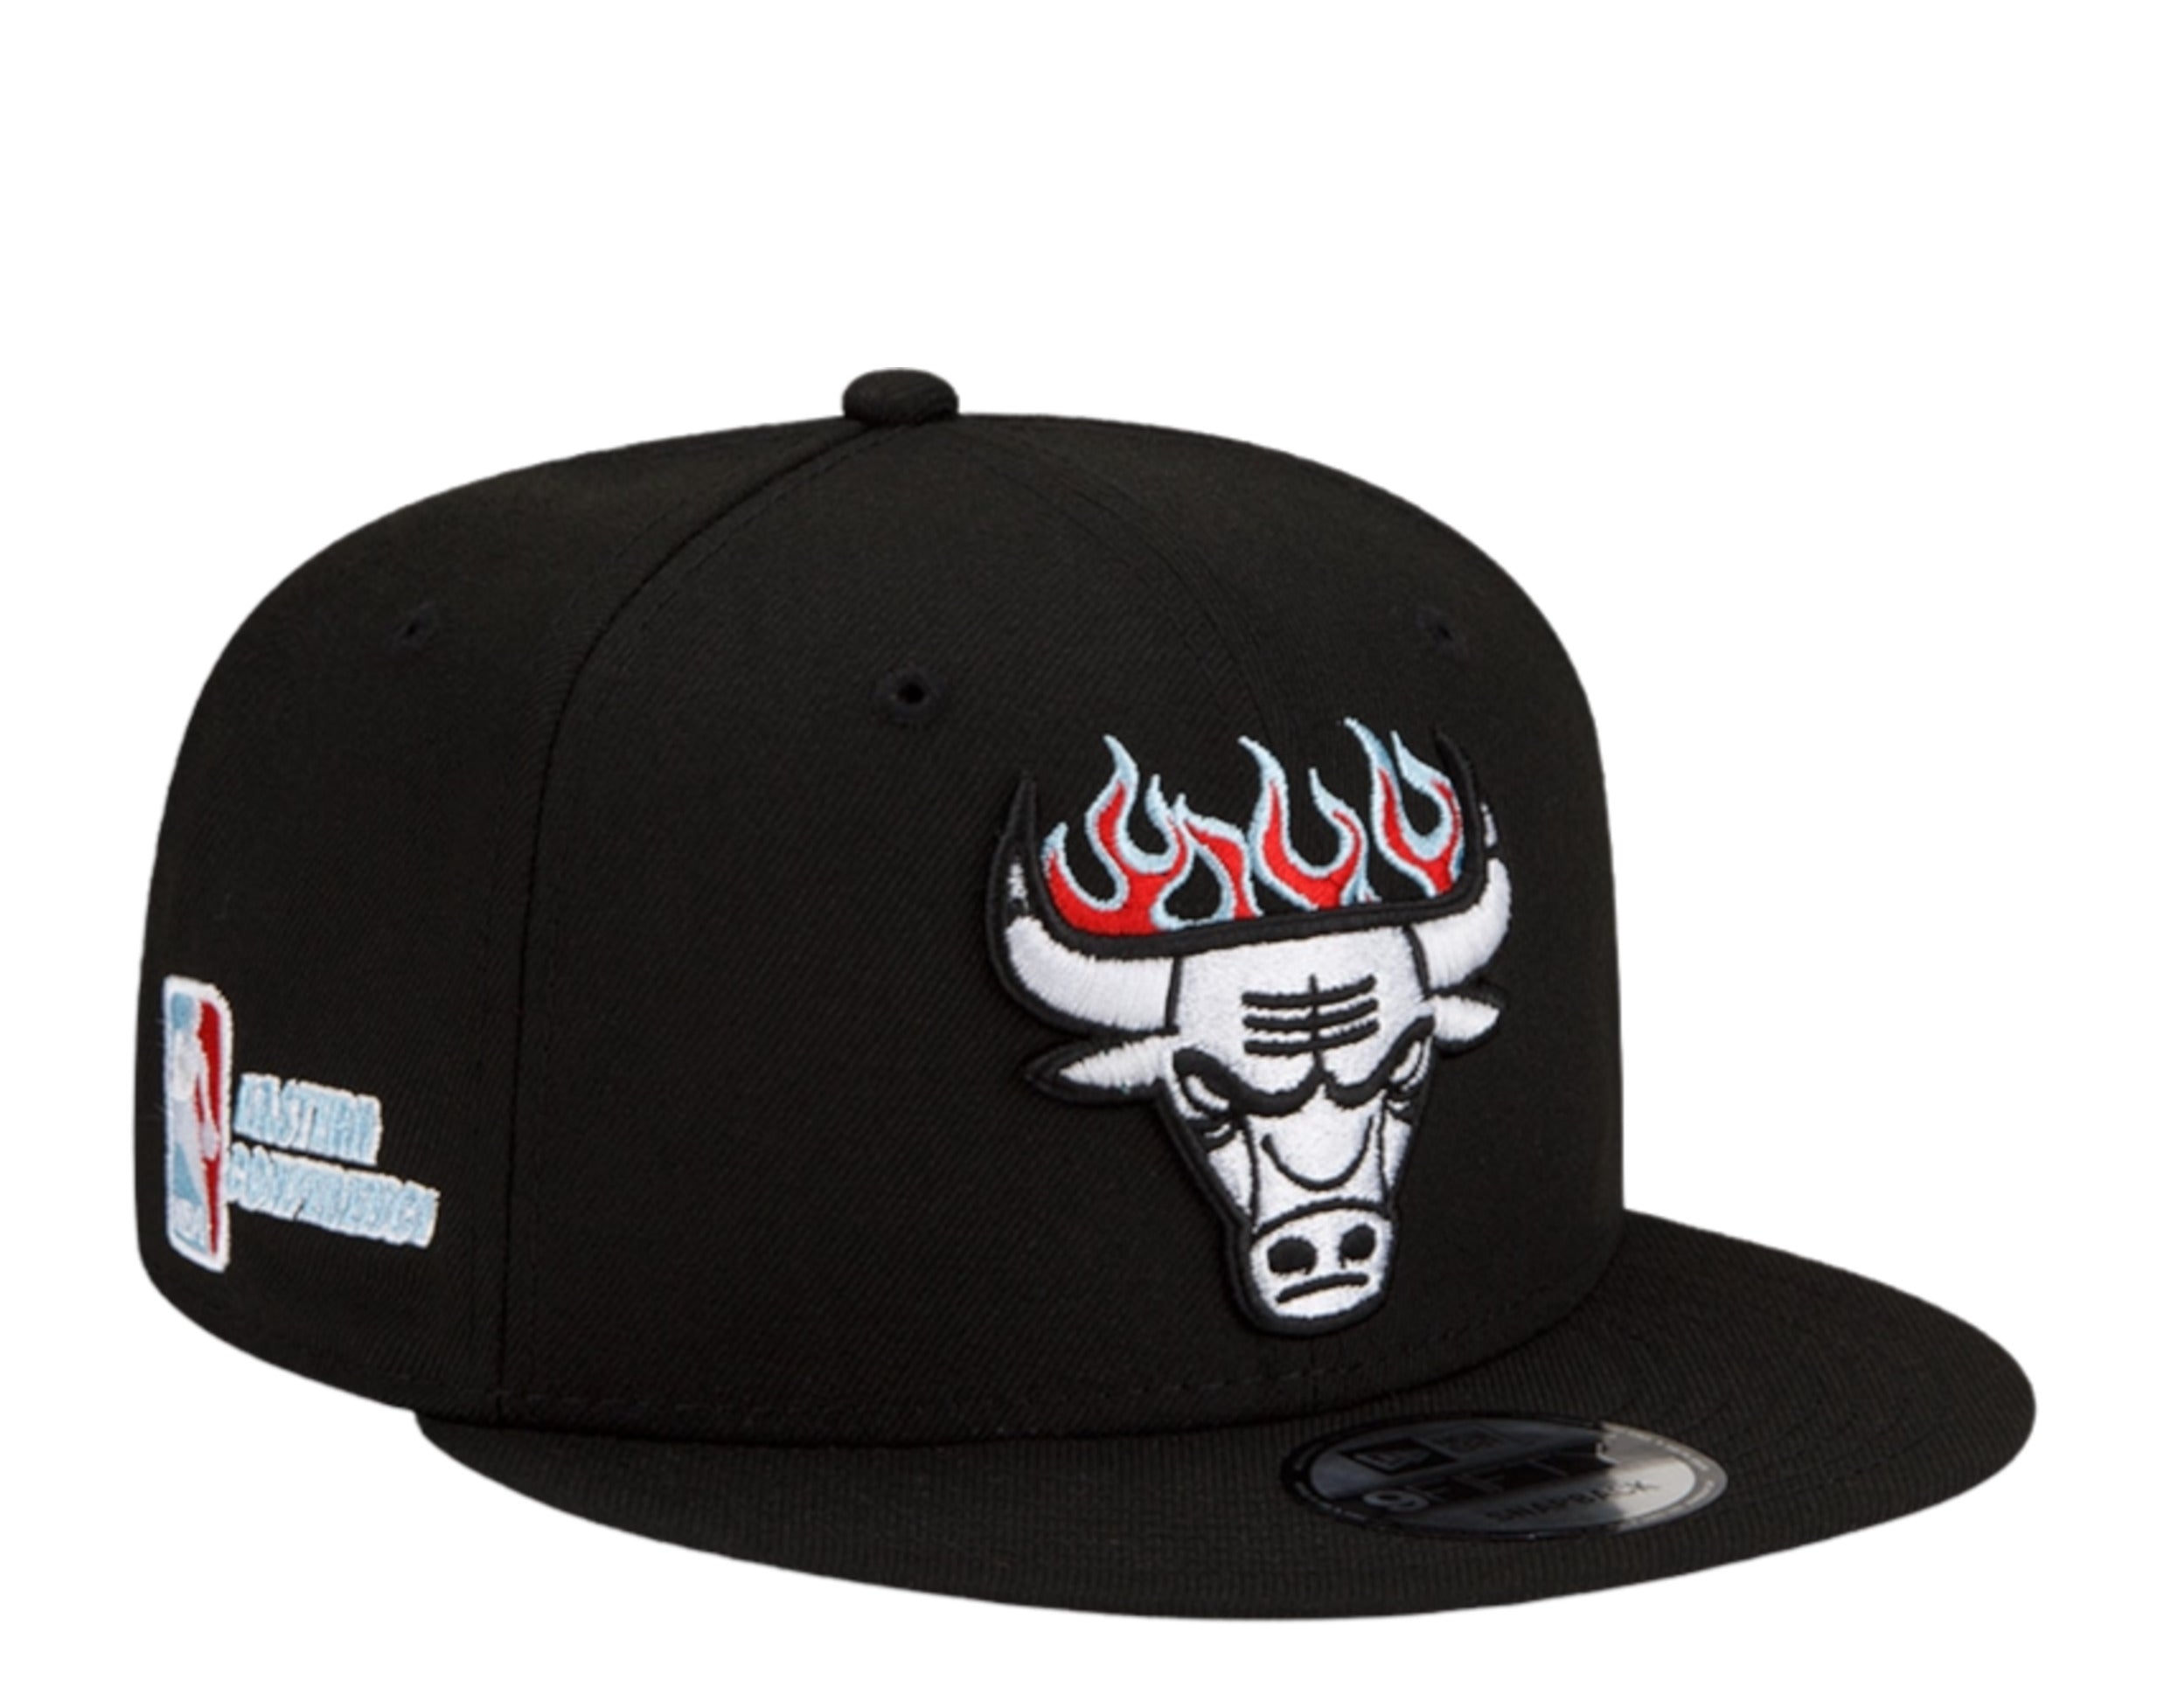 Matching New Era Chicago Bulls 9Fifty snapback for – Exclusive